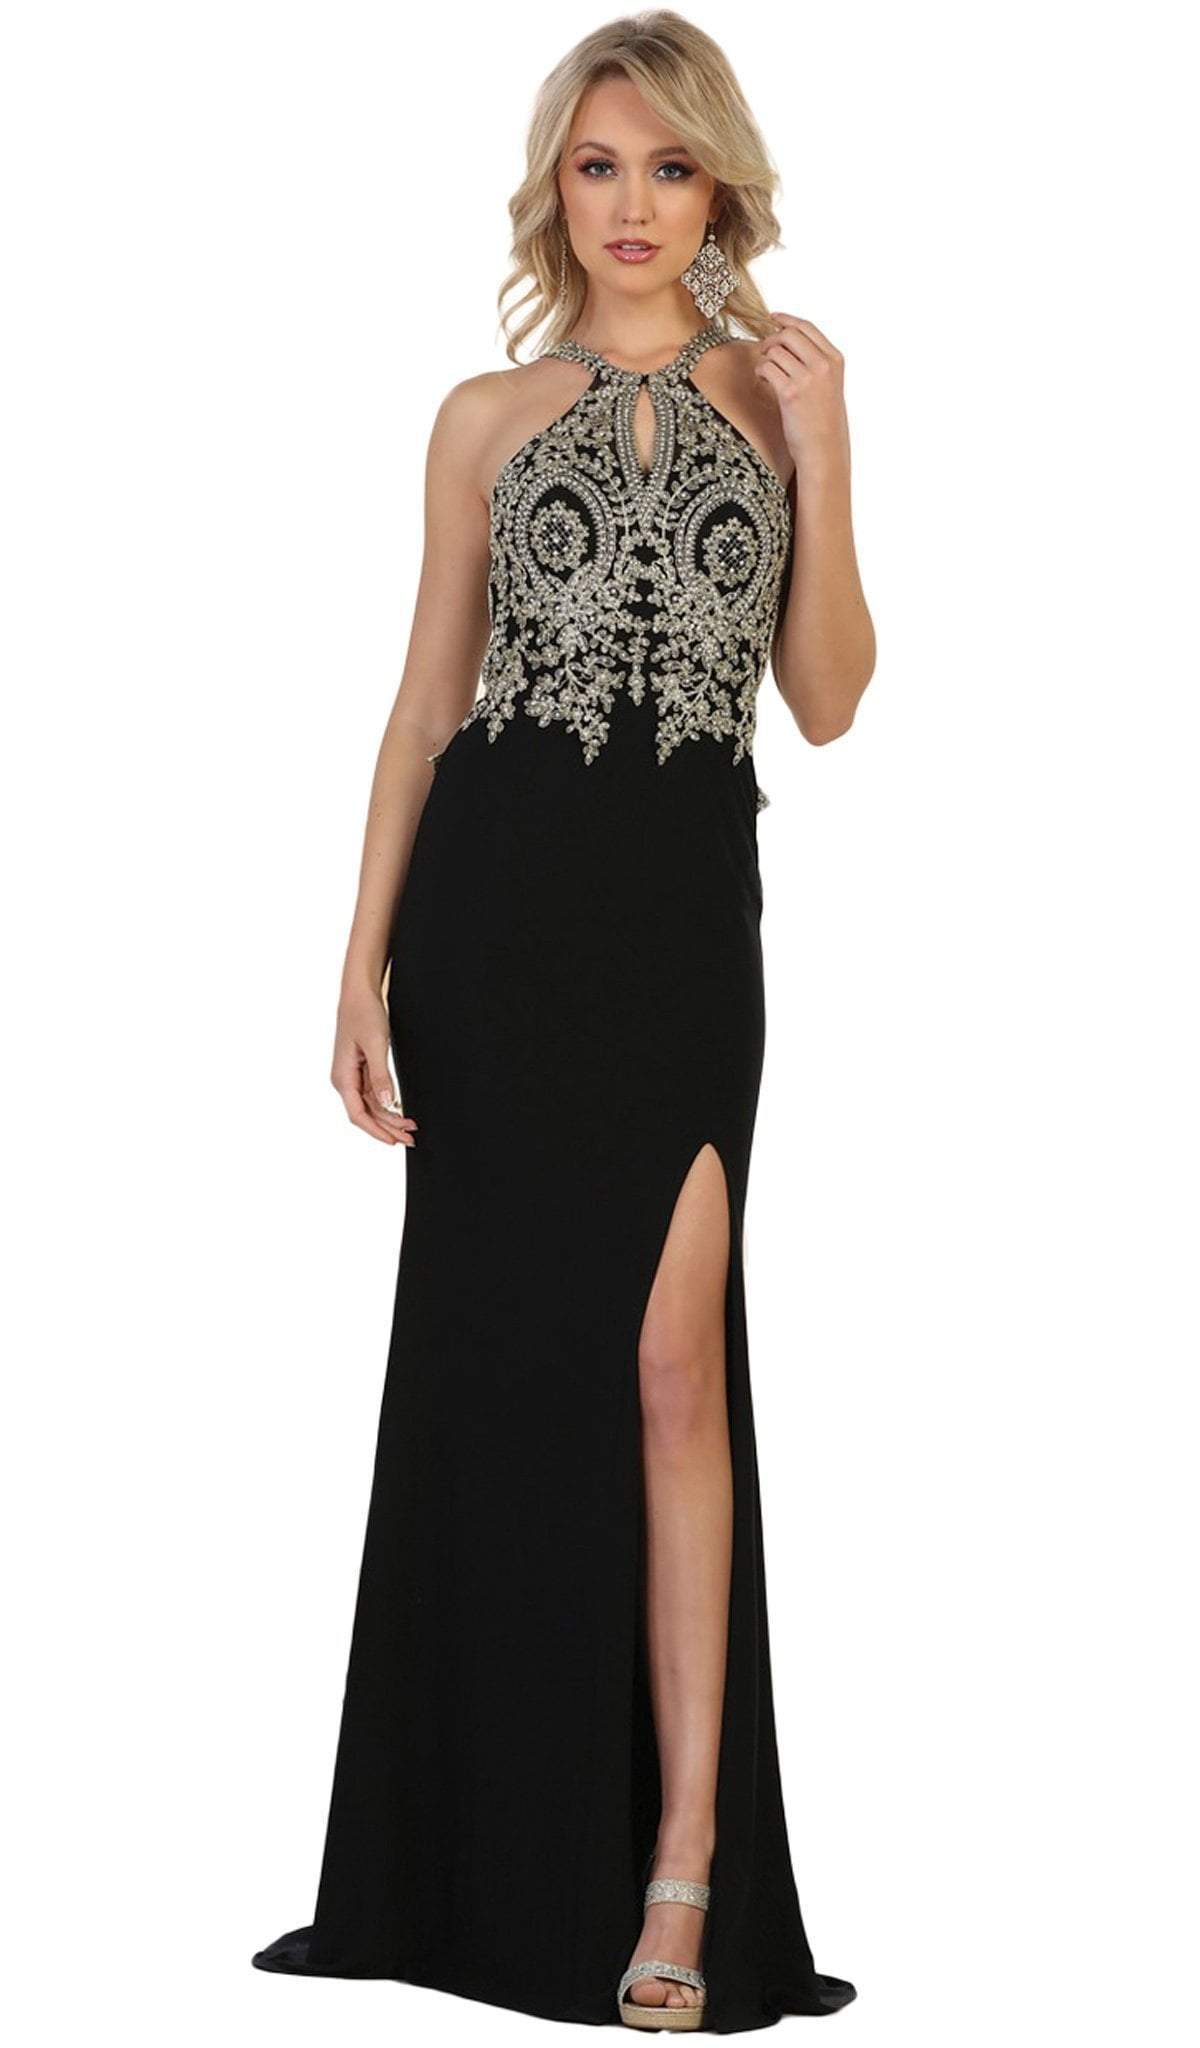 May Queen - Embellished Halter Sheath Evening Gown Special Occasion Dress 2 / Black